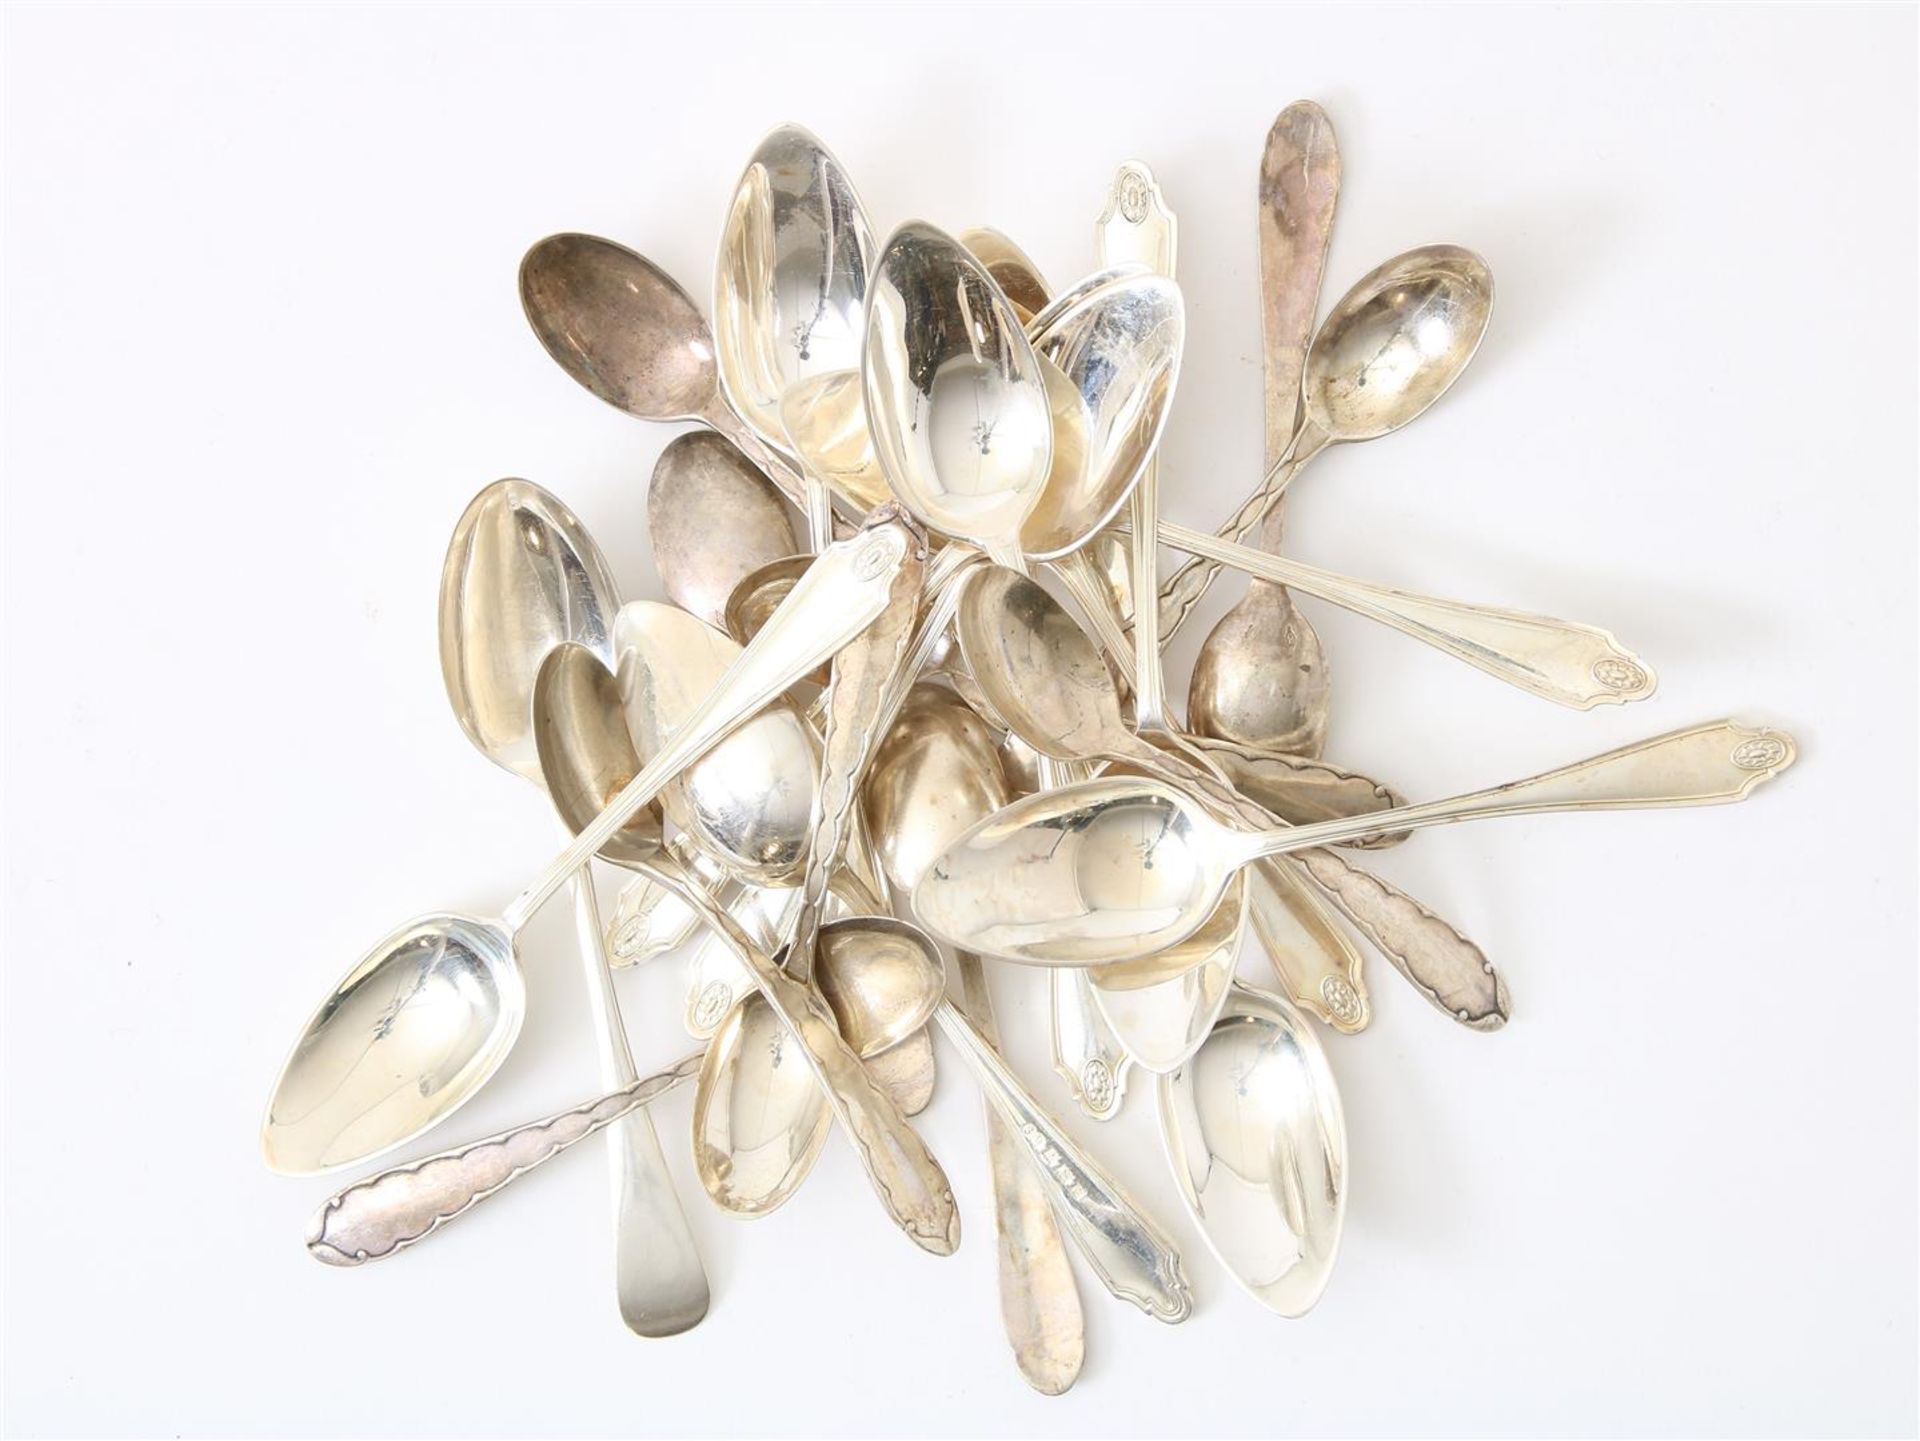 Lot with various spoons